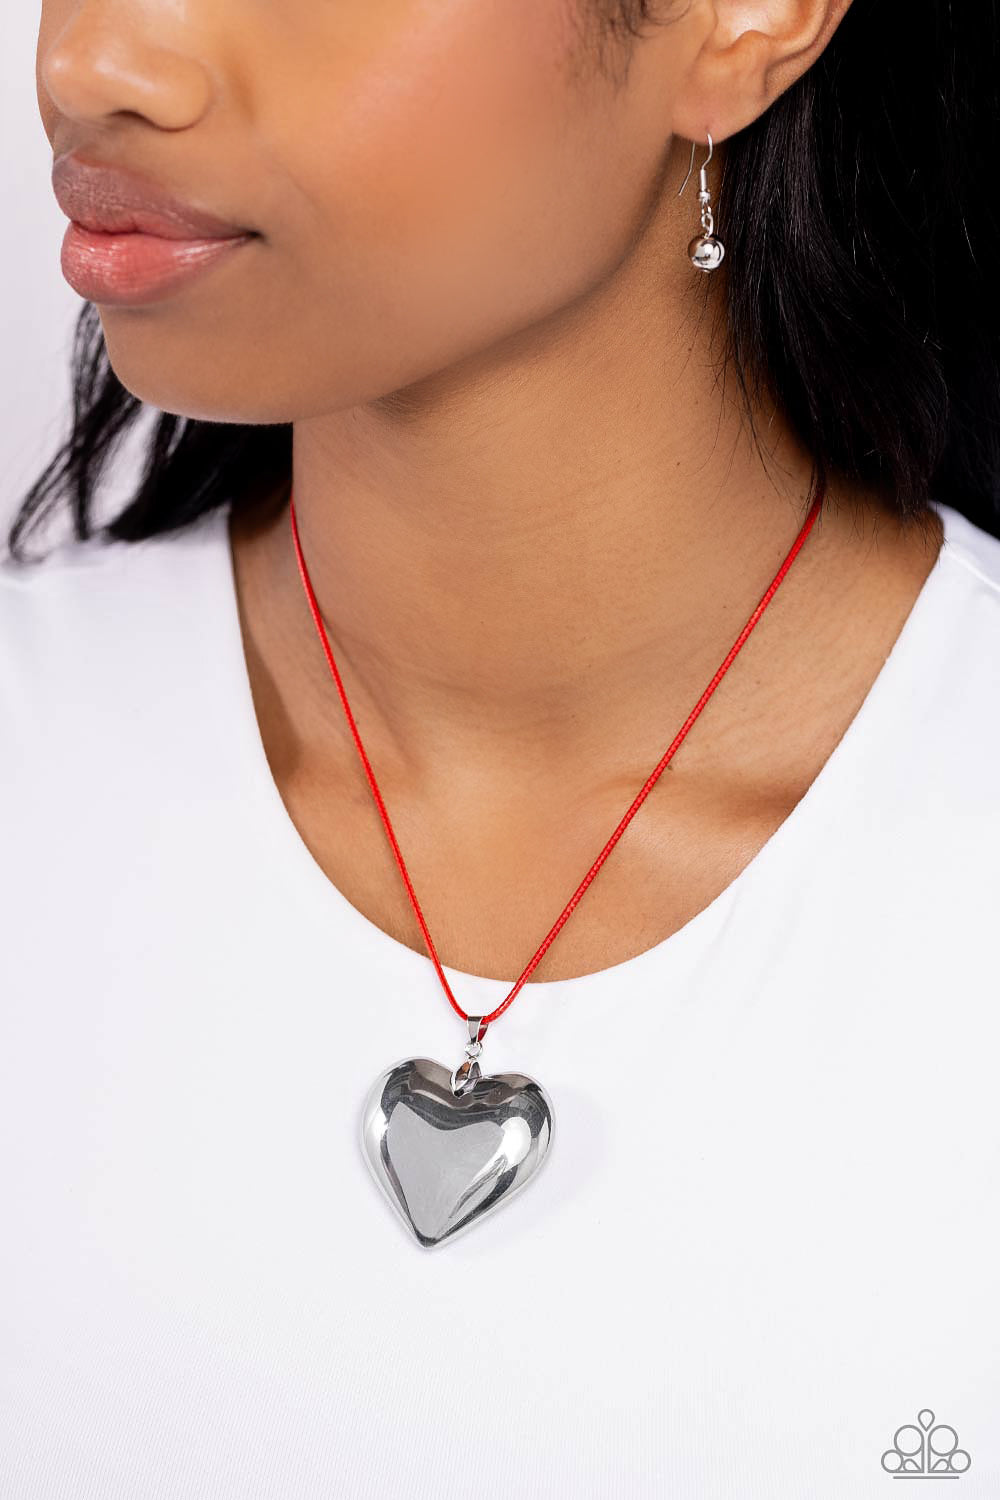 Paparazzi Accessories: Devoted Daze - Red Heart Necklace